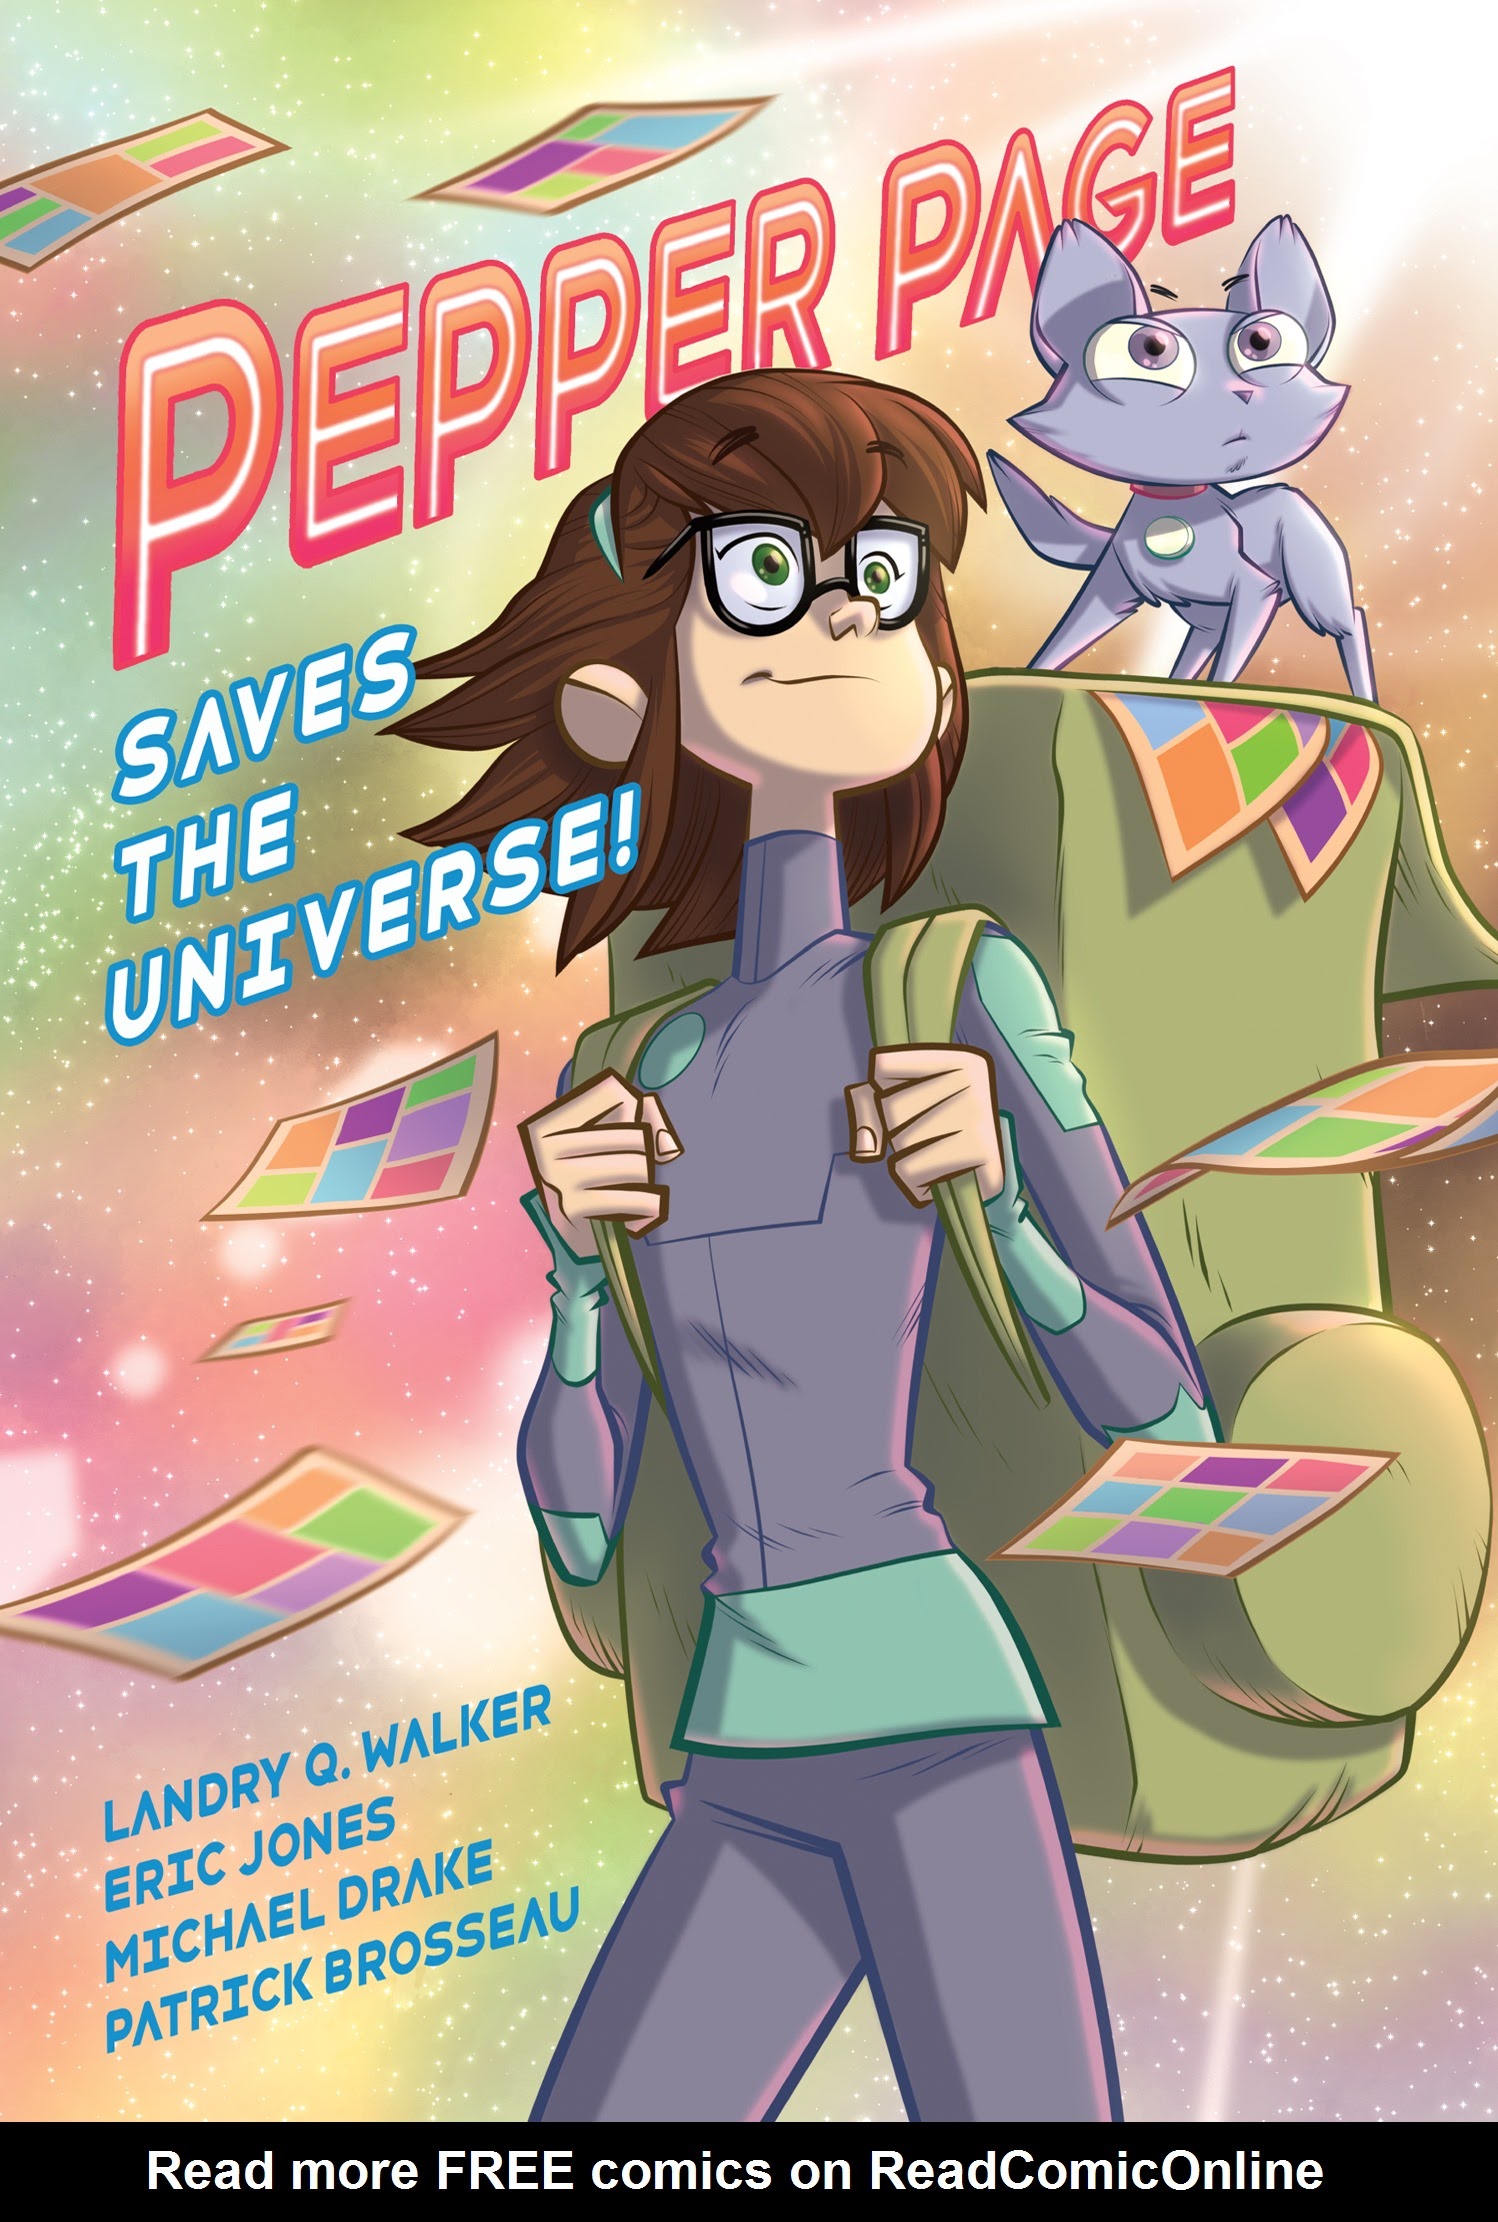 Read online The Infinite Adventures of Supernova: Pepper Page Saves the Universe! comic -  Issue # TPB (Part 1) - 1